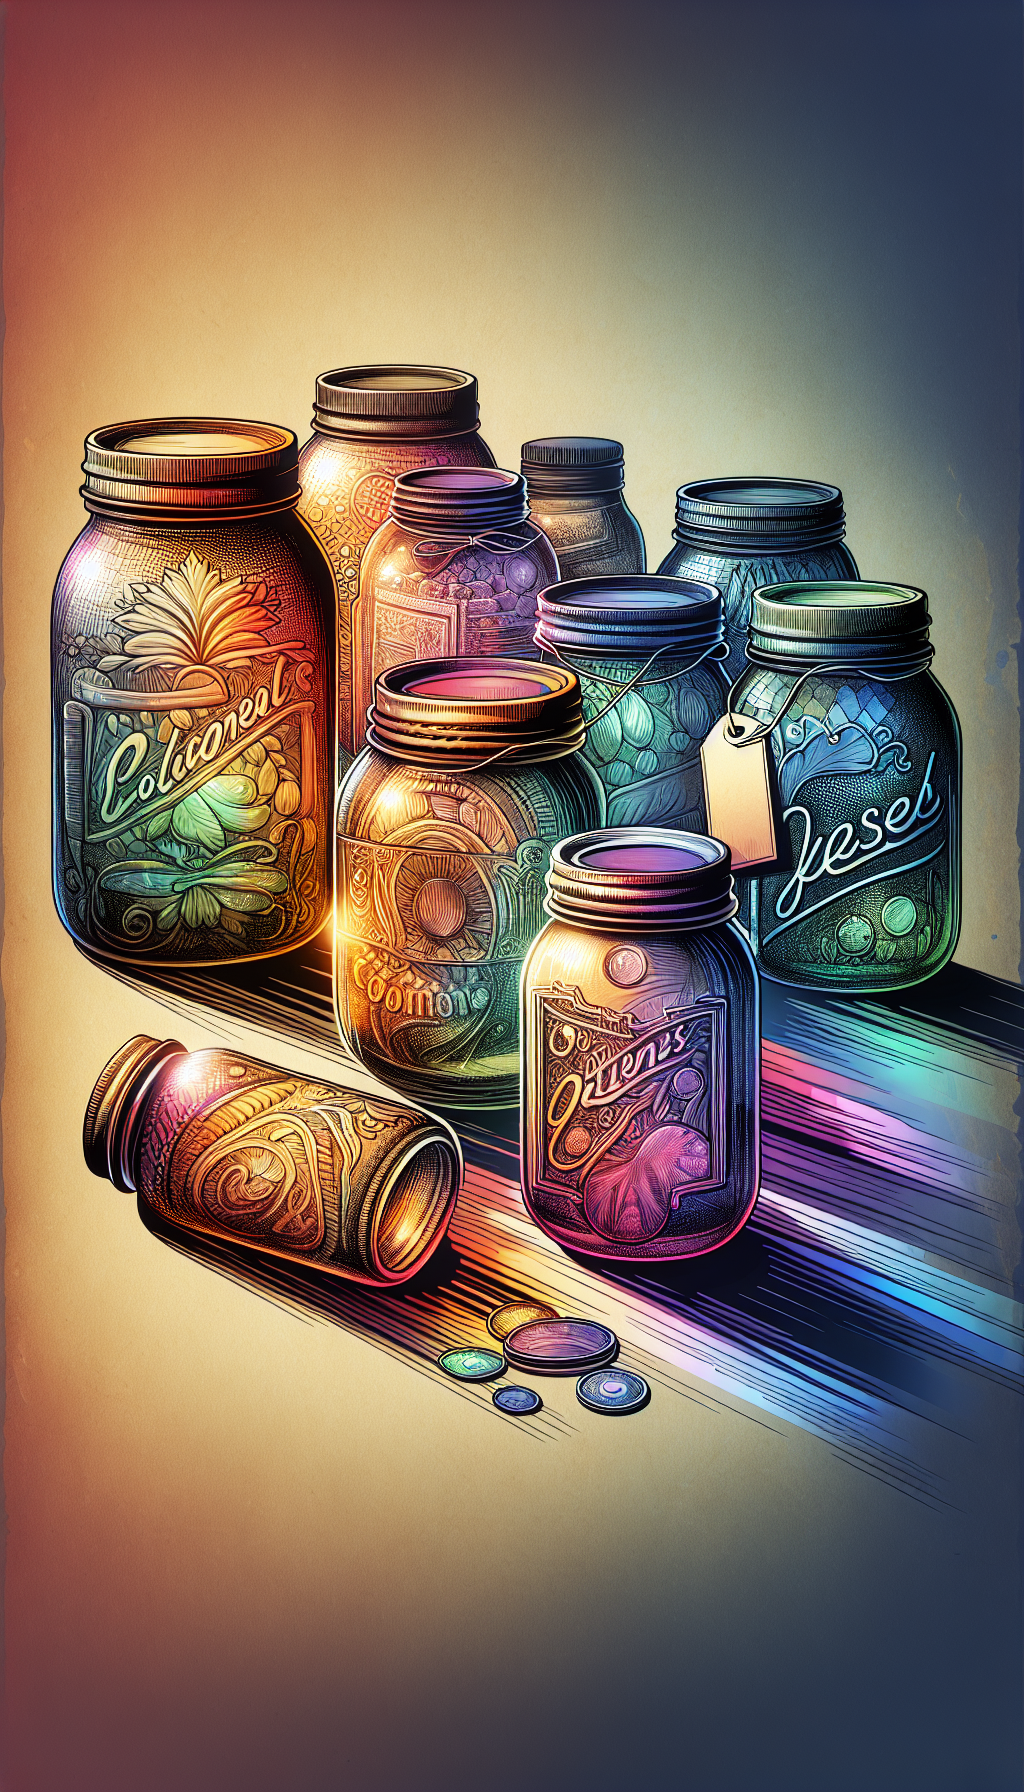 An intricate artwork featuring a cascade of antique mason jars, their glass surfaces awash with a spectrum of vibrant, translucent hues, each embossed with intricate historic patterns. Light filters through, casting colorful shadows that spell out "Colorful Past", whilst a price tag dangles from an aged jar, symbolizing the valued heritage within these colored glass artifacts.